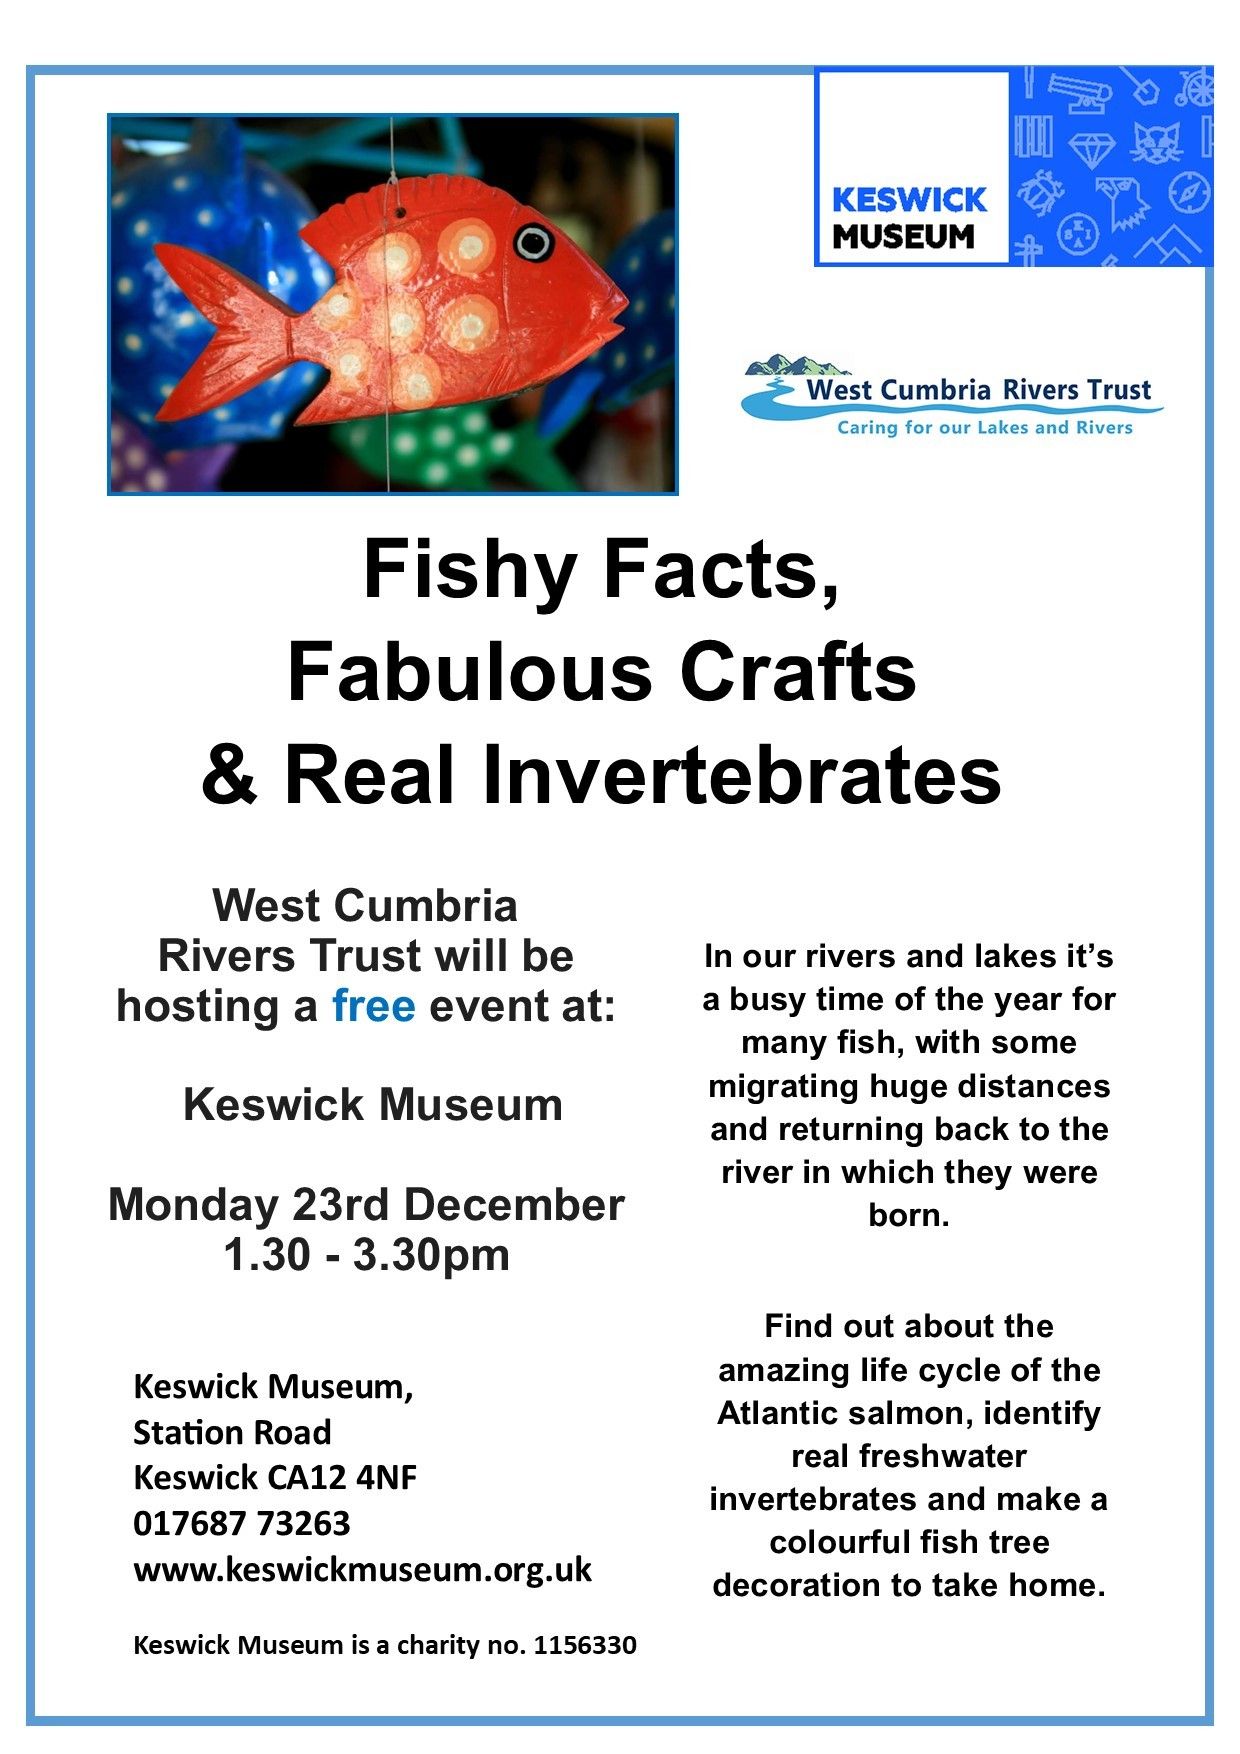 FISHY FACTS, FABULOUS CRAFTS & REAL INVERTEBRATES